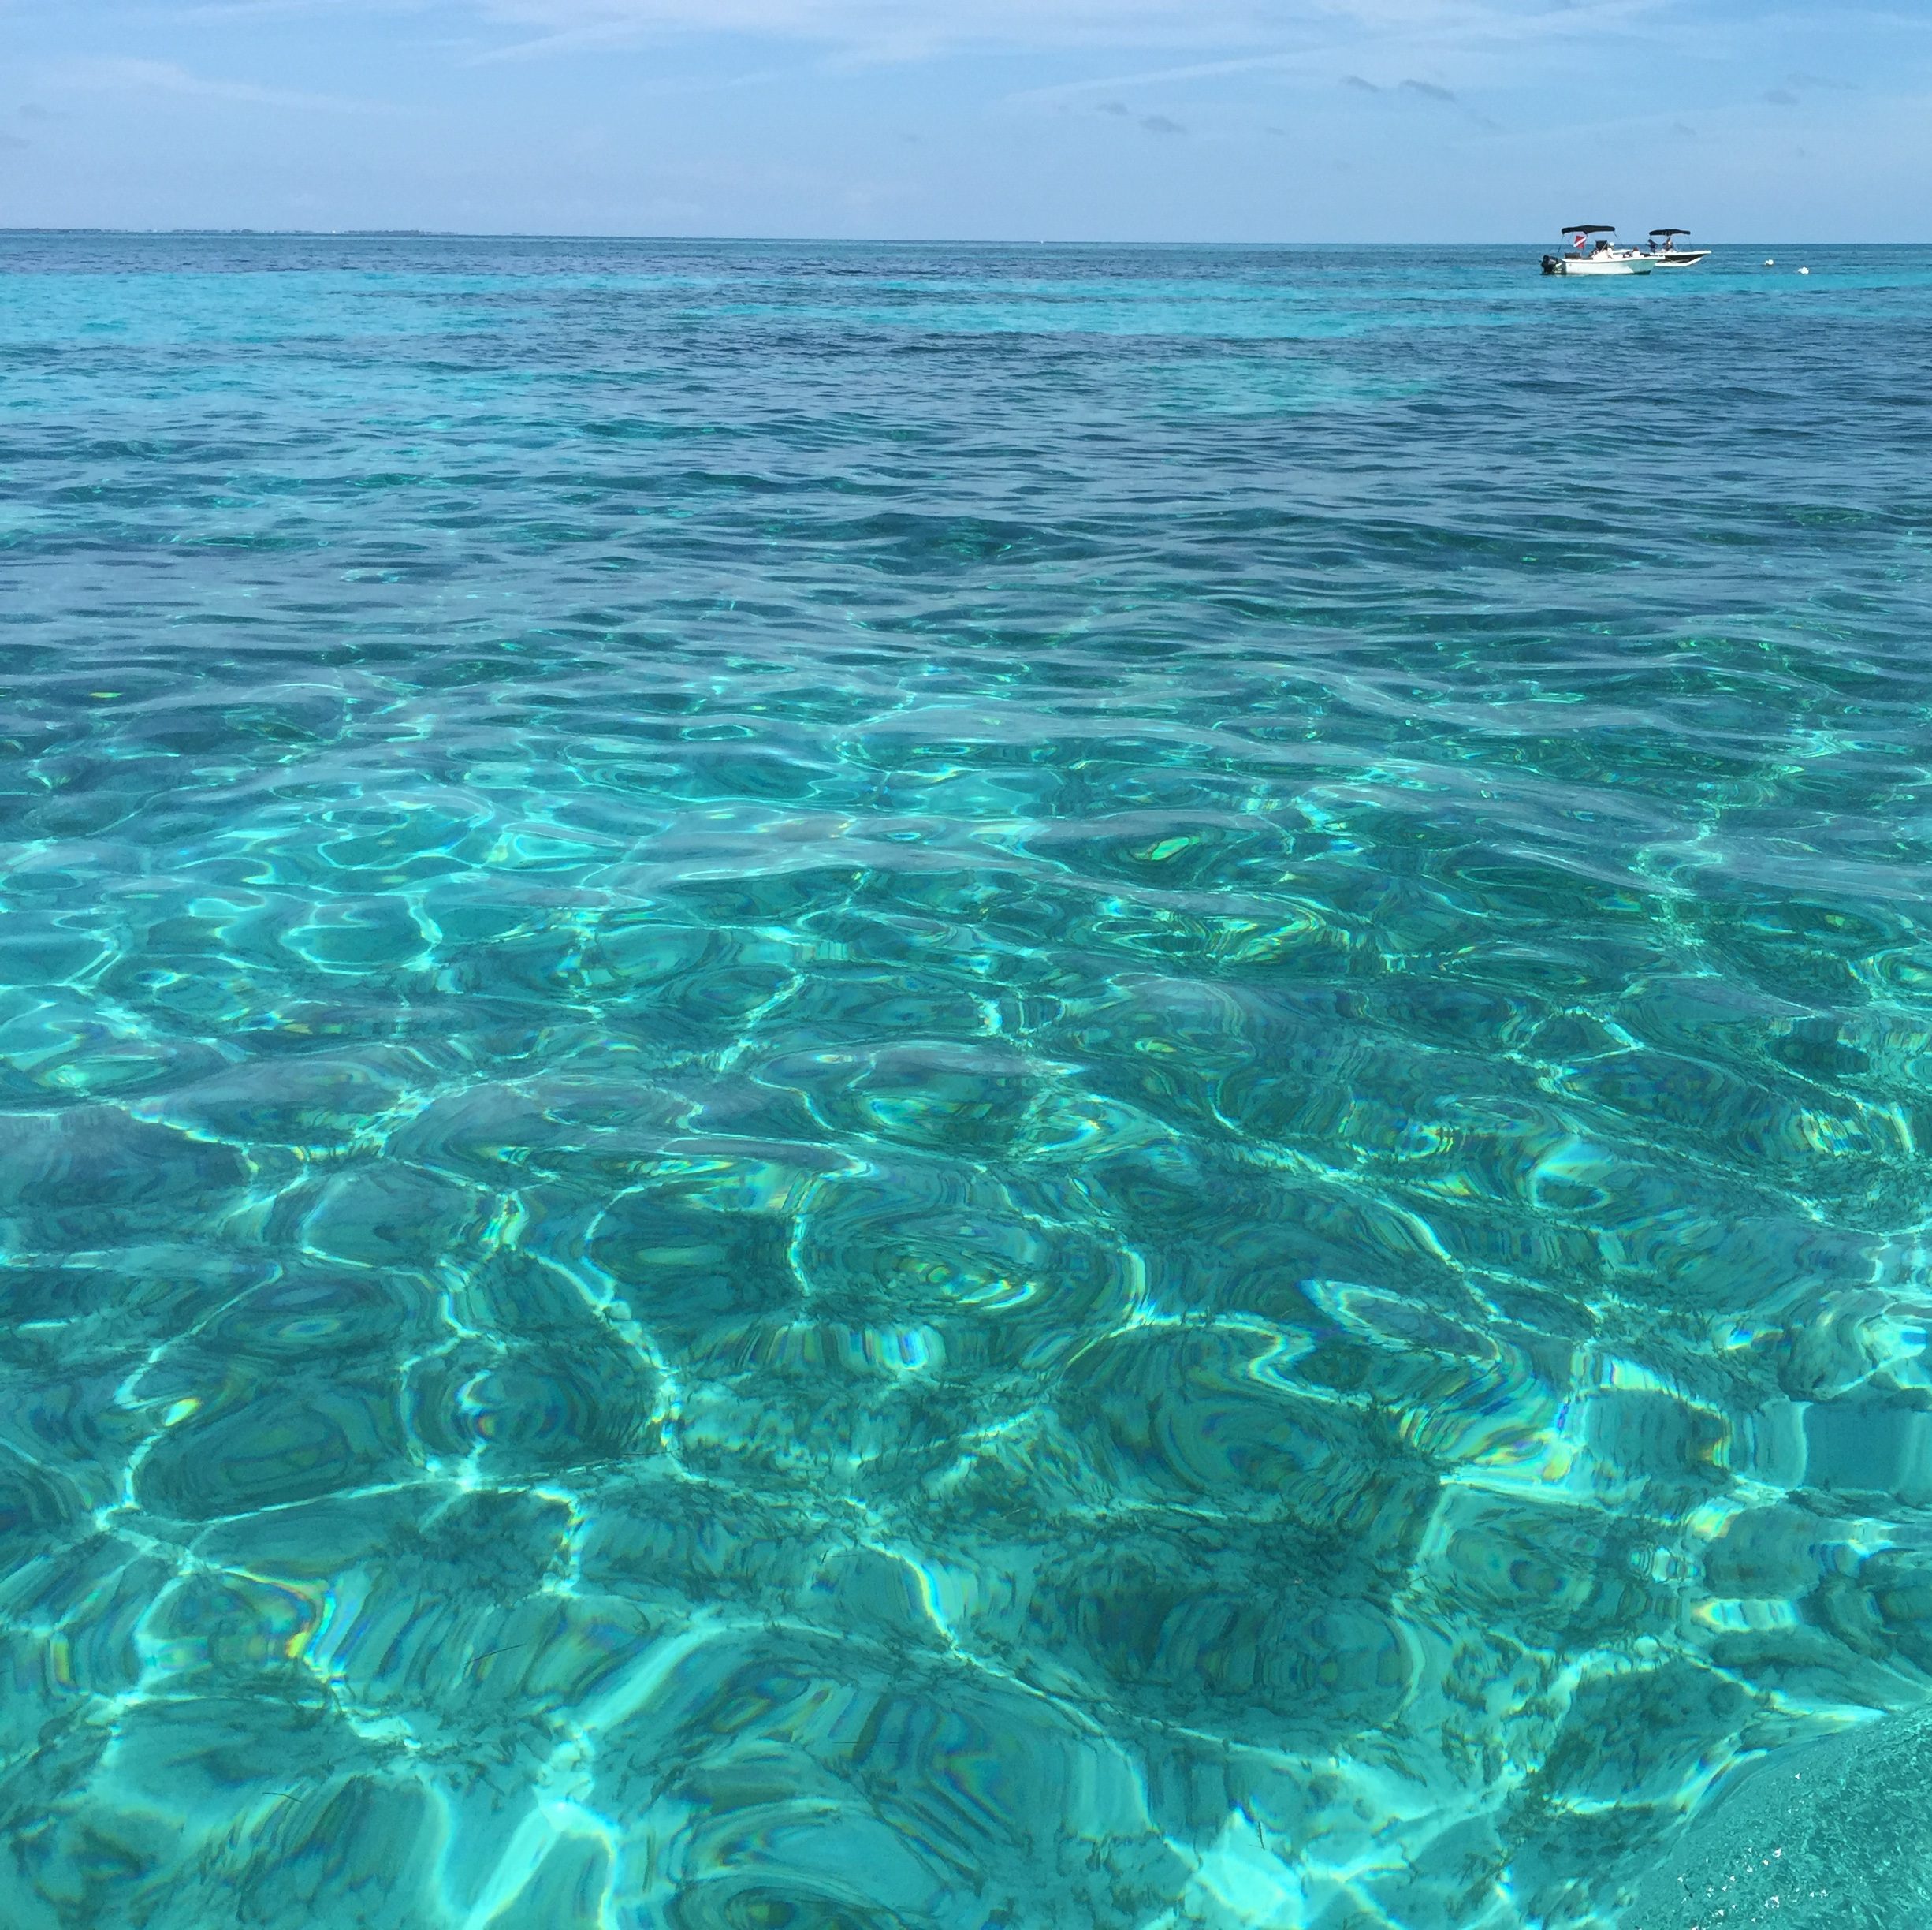 A beautiful photograph of turquoise, crystal clear ocean waters.